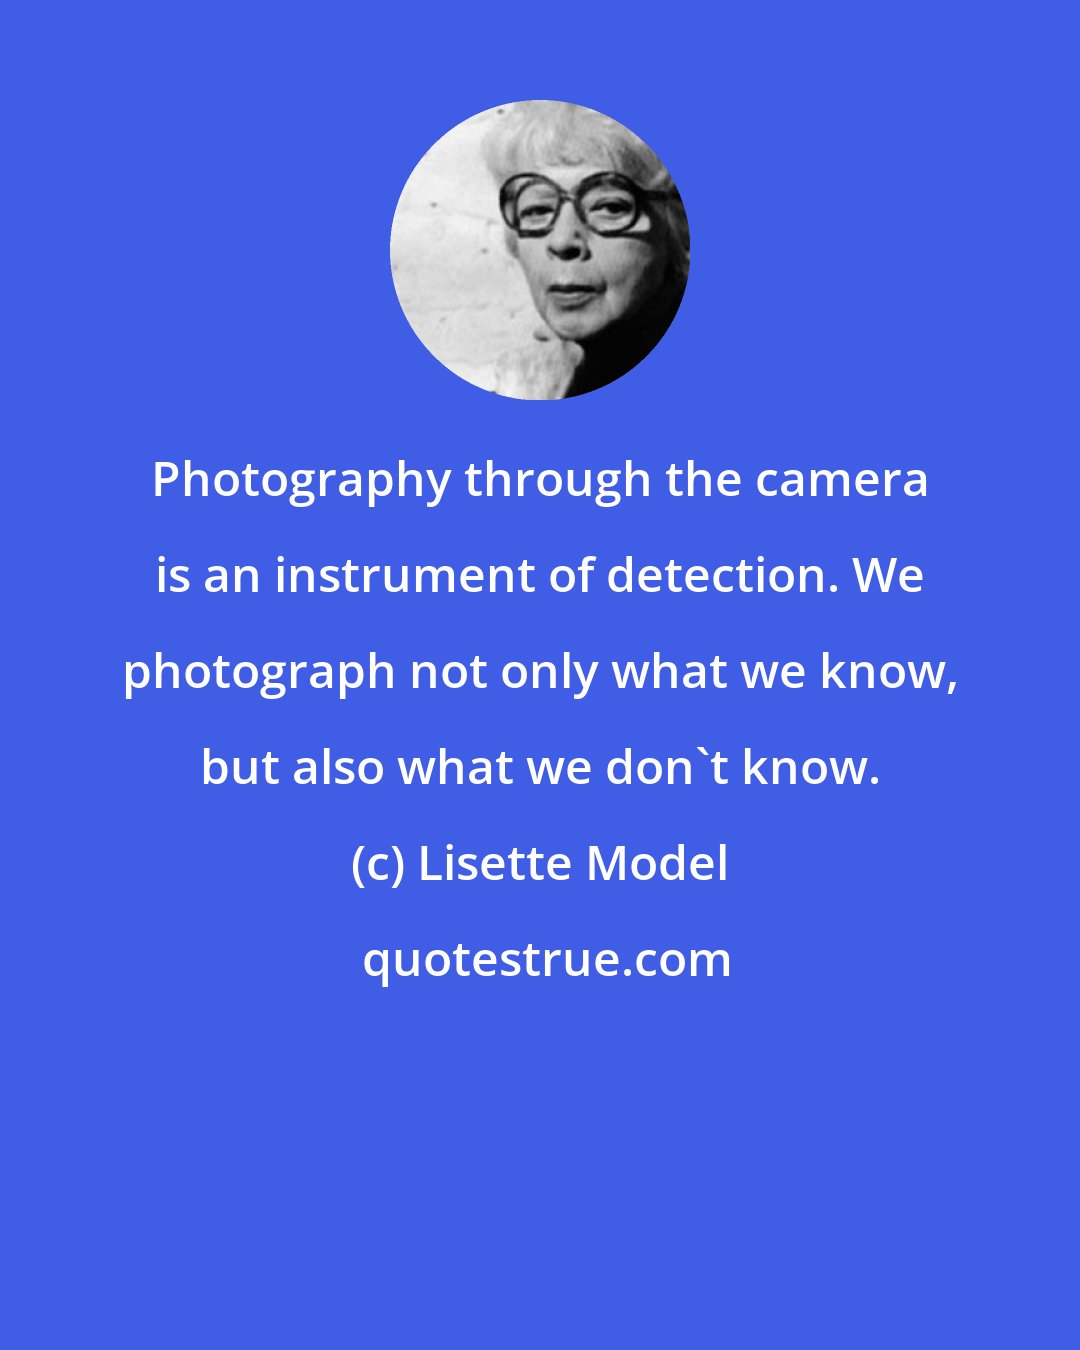 Lisette Model: Photography through the camera is an instrument of detection. We photograph not only what we know, but also what we don't know.